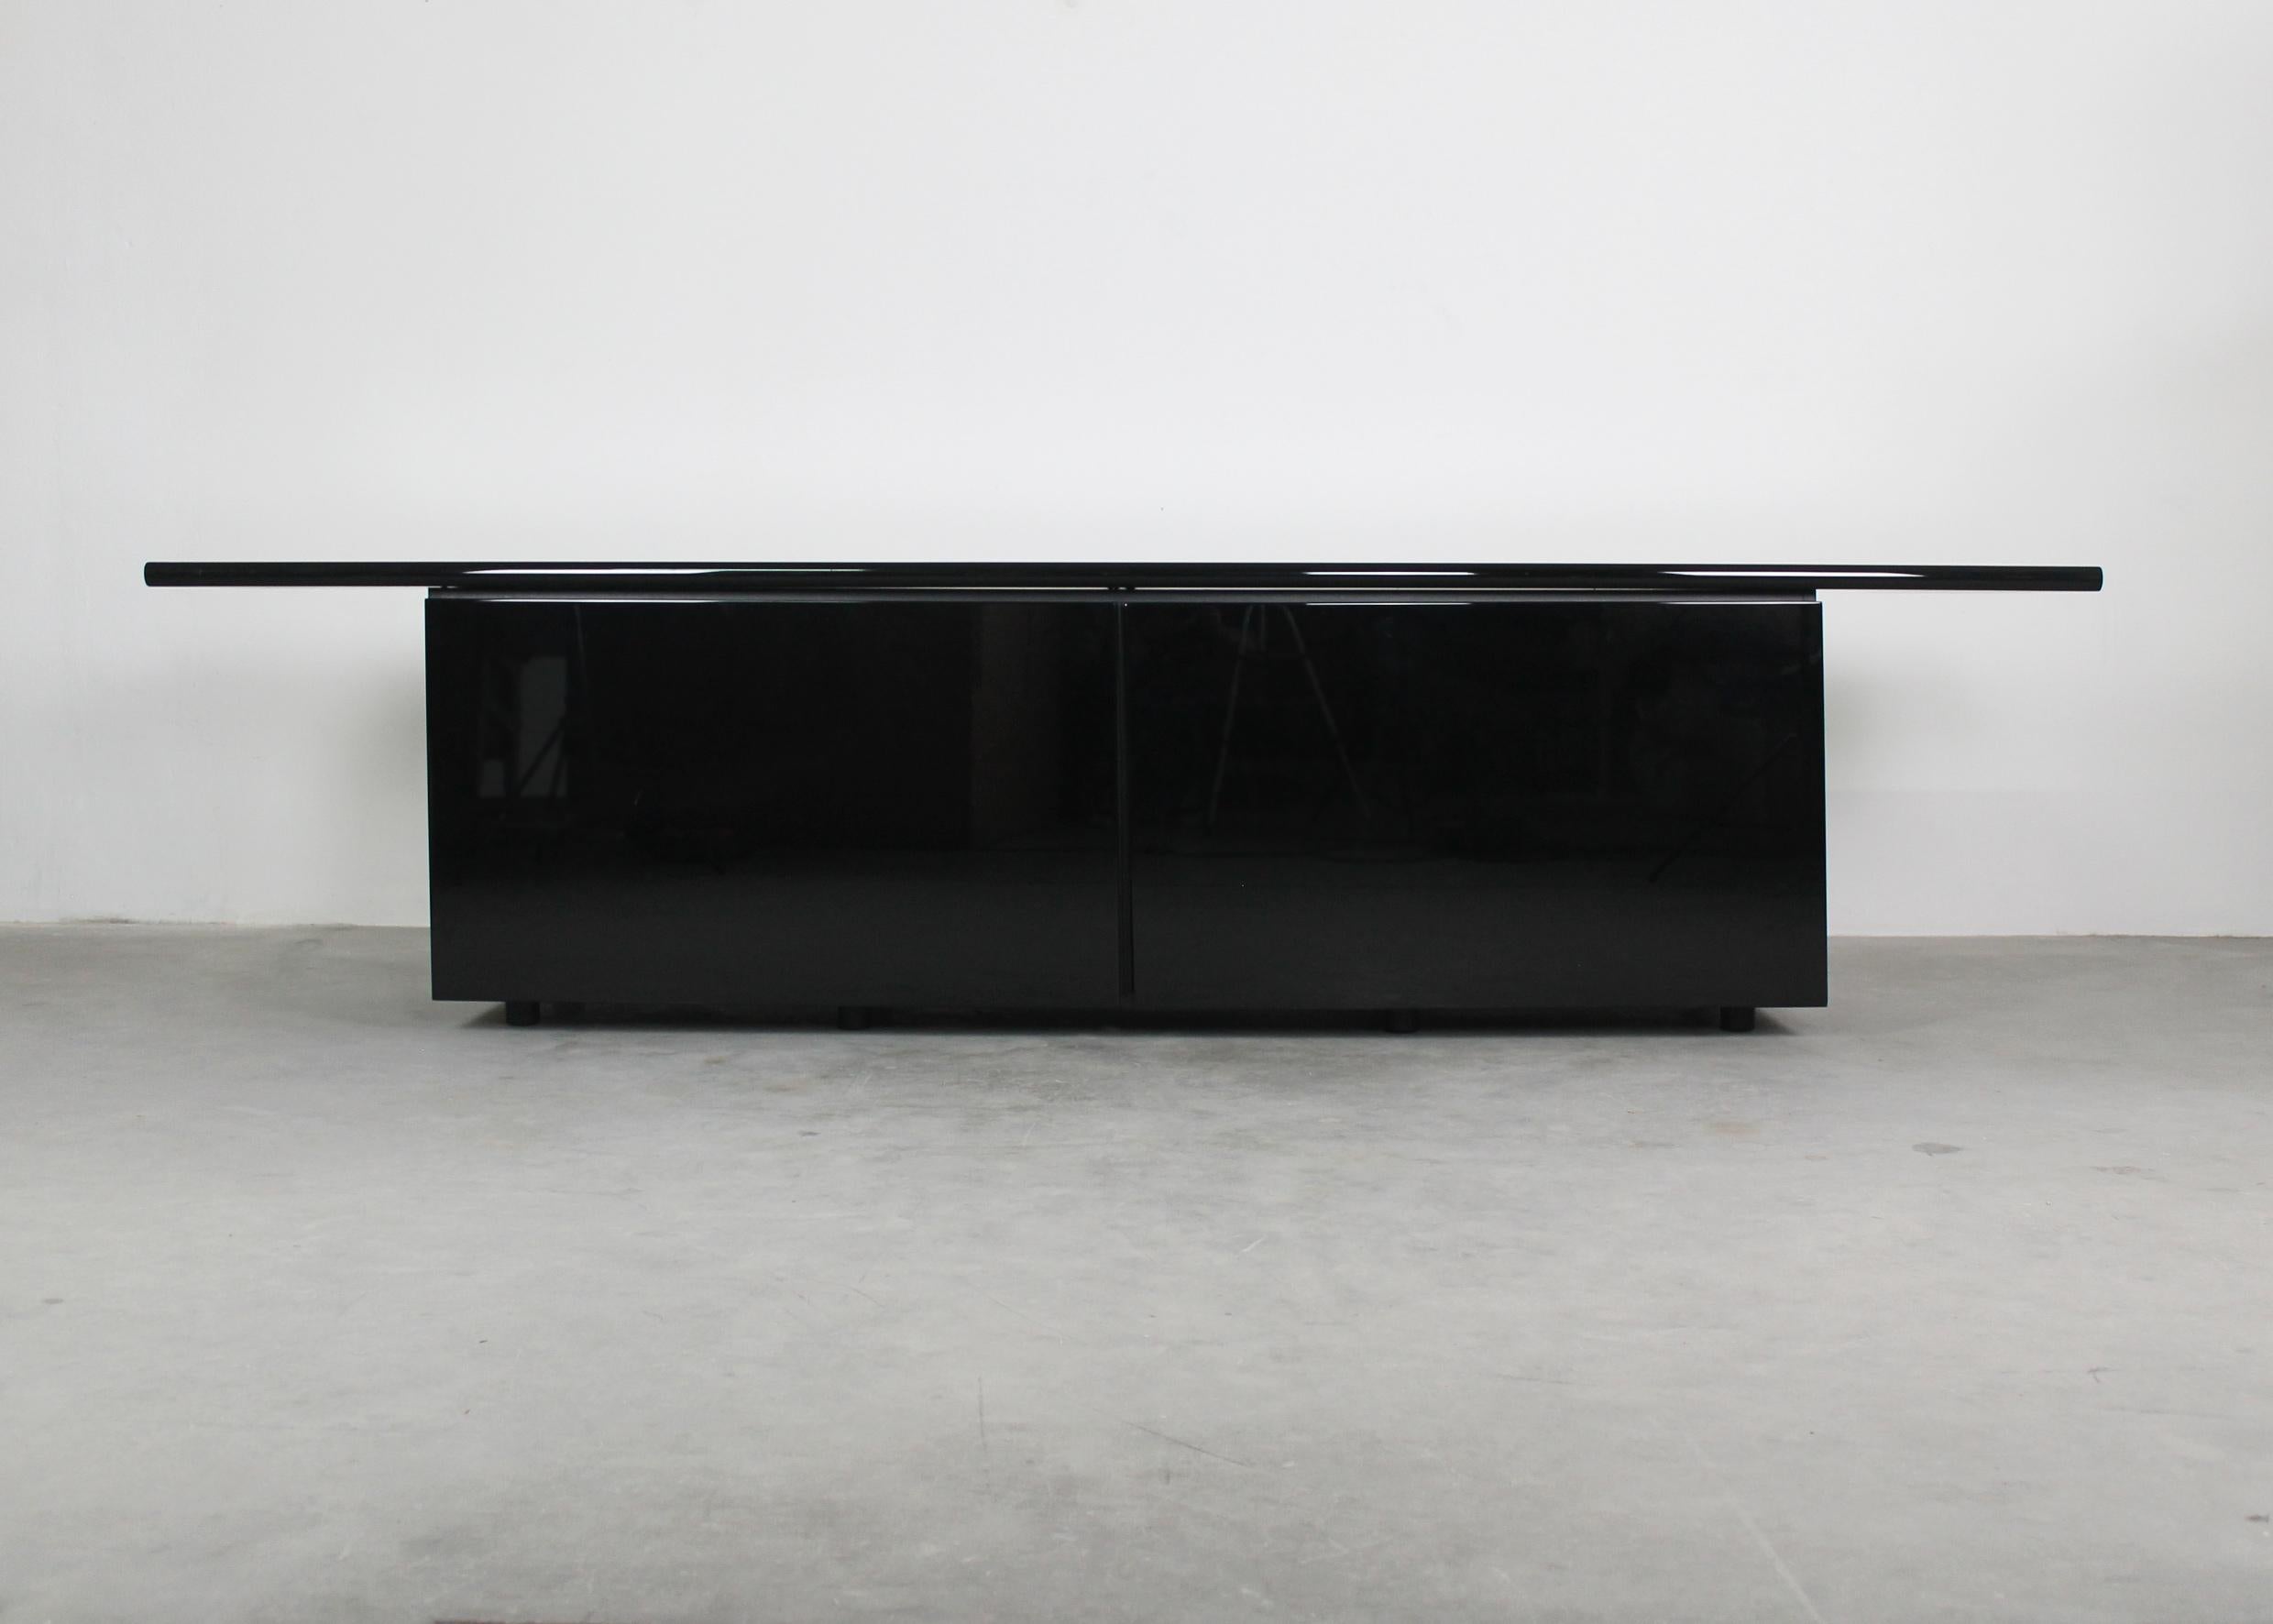 Sheraton sideboard presents two sliding doors that slide outward to expose three inner storage units with glass shelves and four drawers on the central part.
The sideboard has a structure is in black (with a glossy finish) lacquered wood,